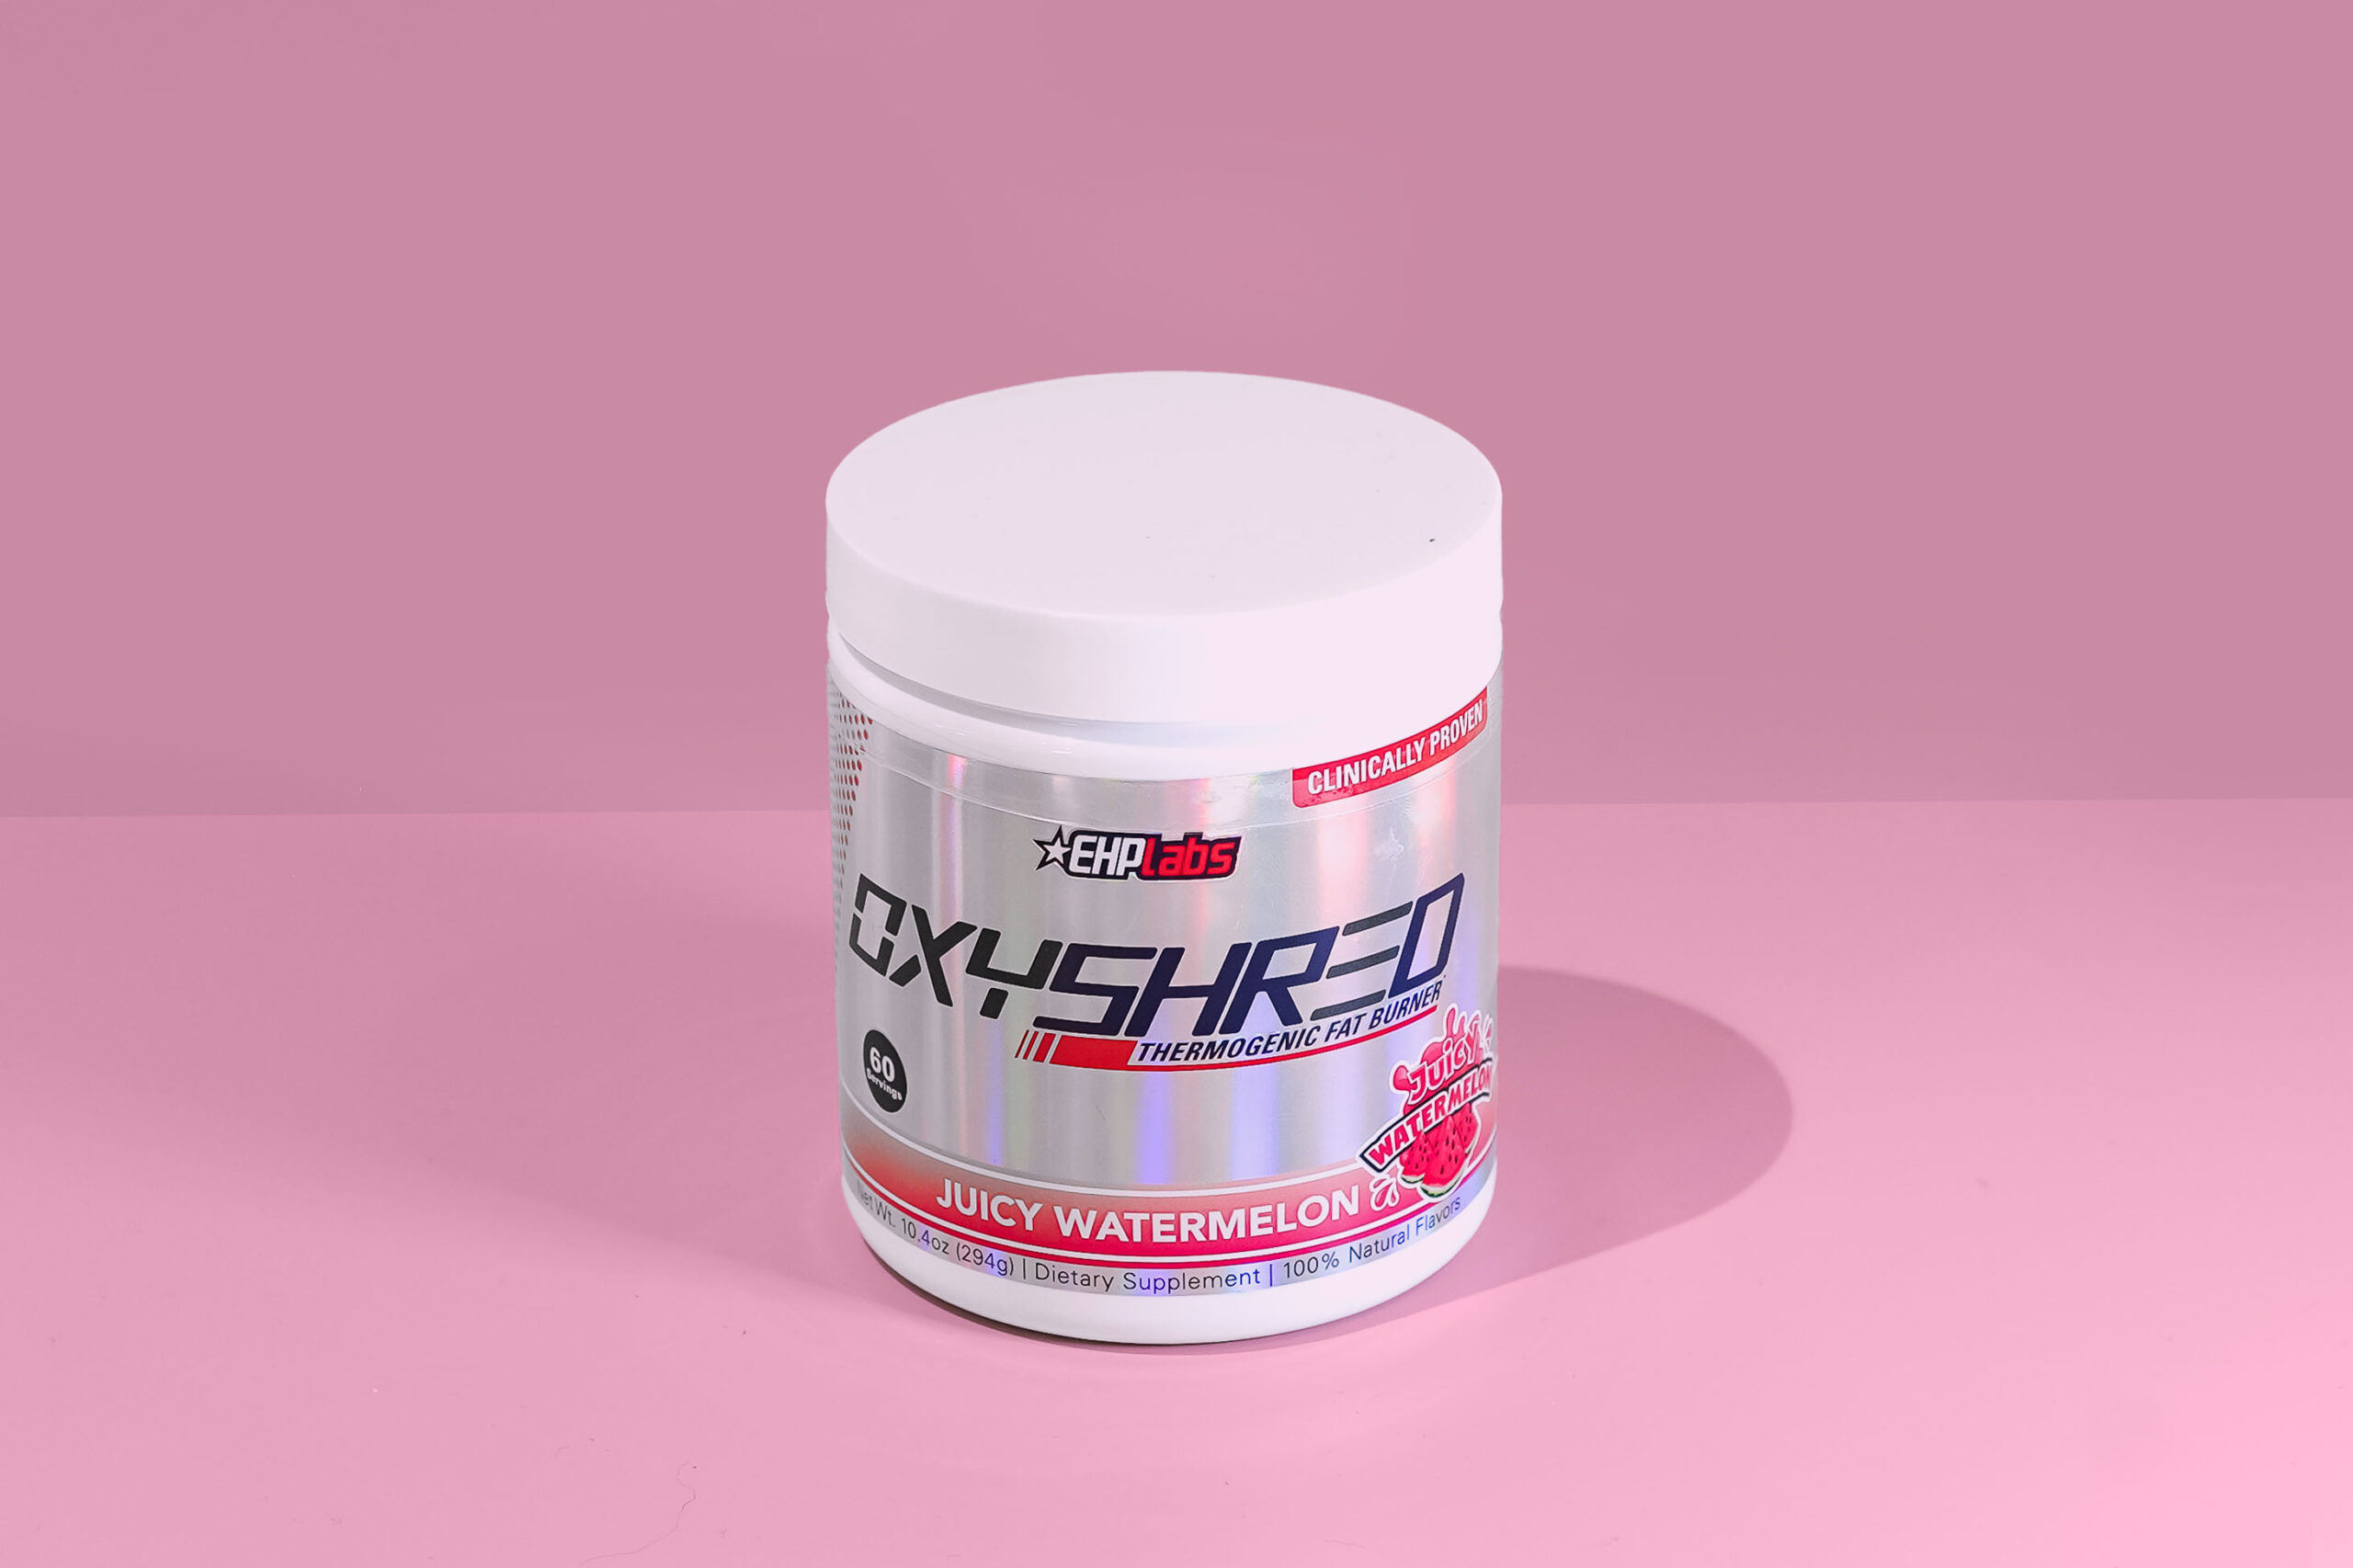 OxyShred Review: 30 Days Getting My Shred On